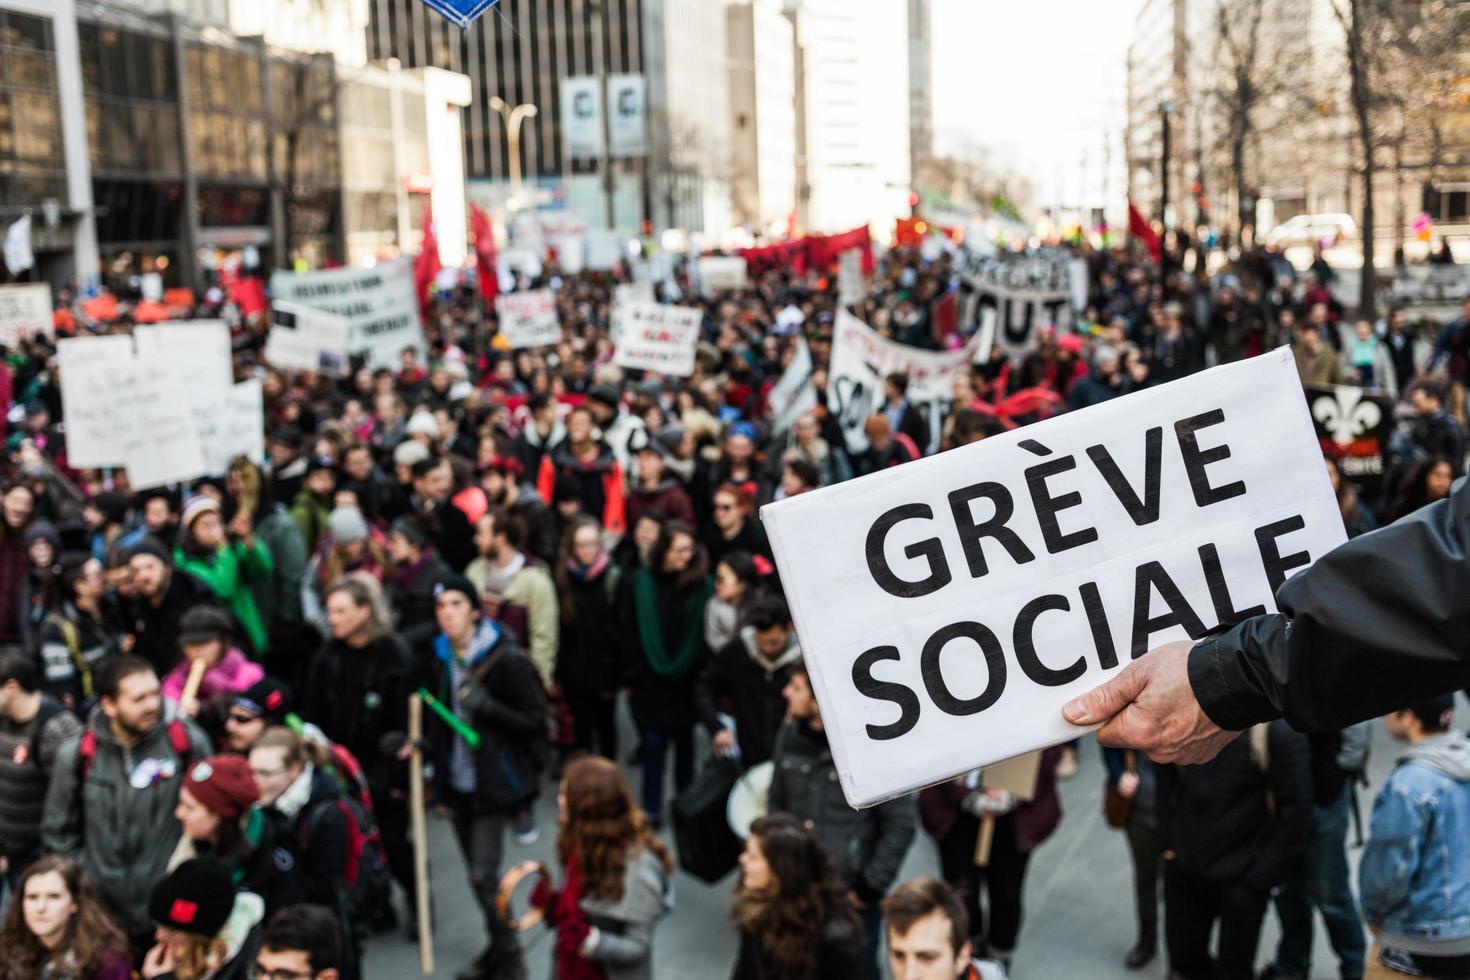 MONTREAL, CANADA APRIL 02 2015 - Someone Holding a Sigh Saying Greve Sociale with Blurry Protester in Background. photo